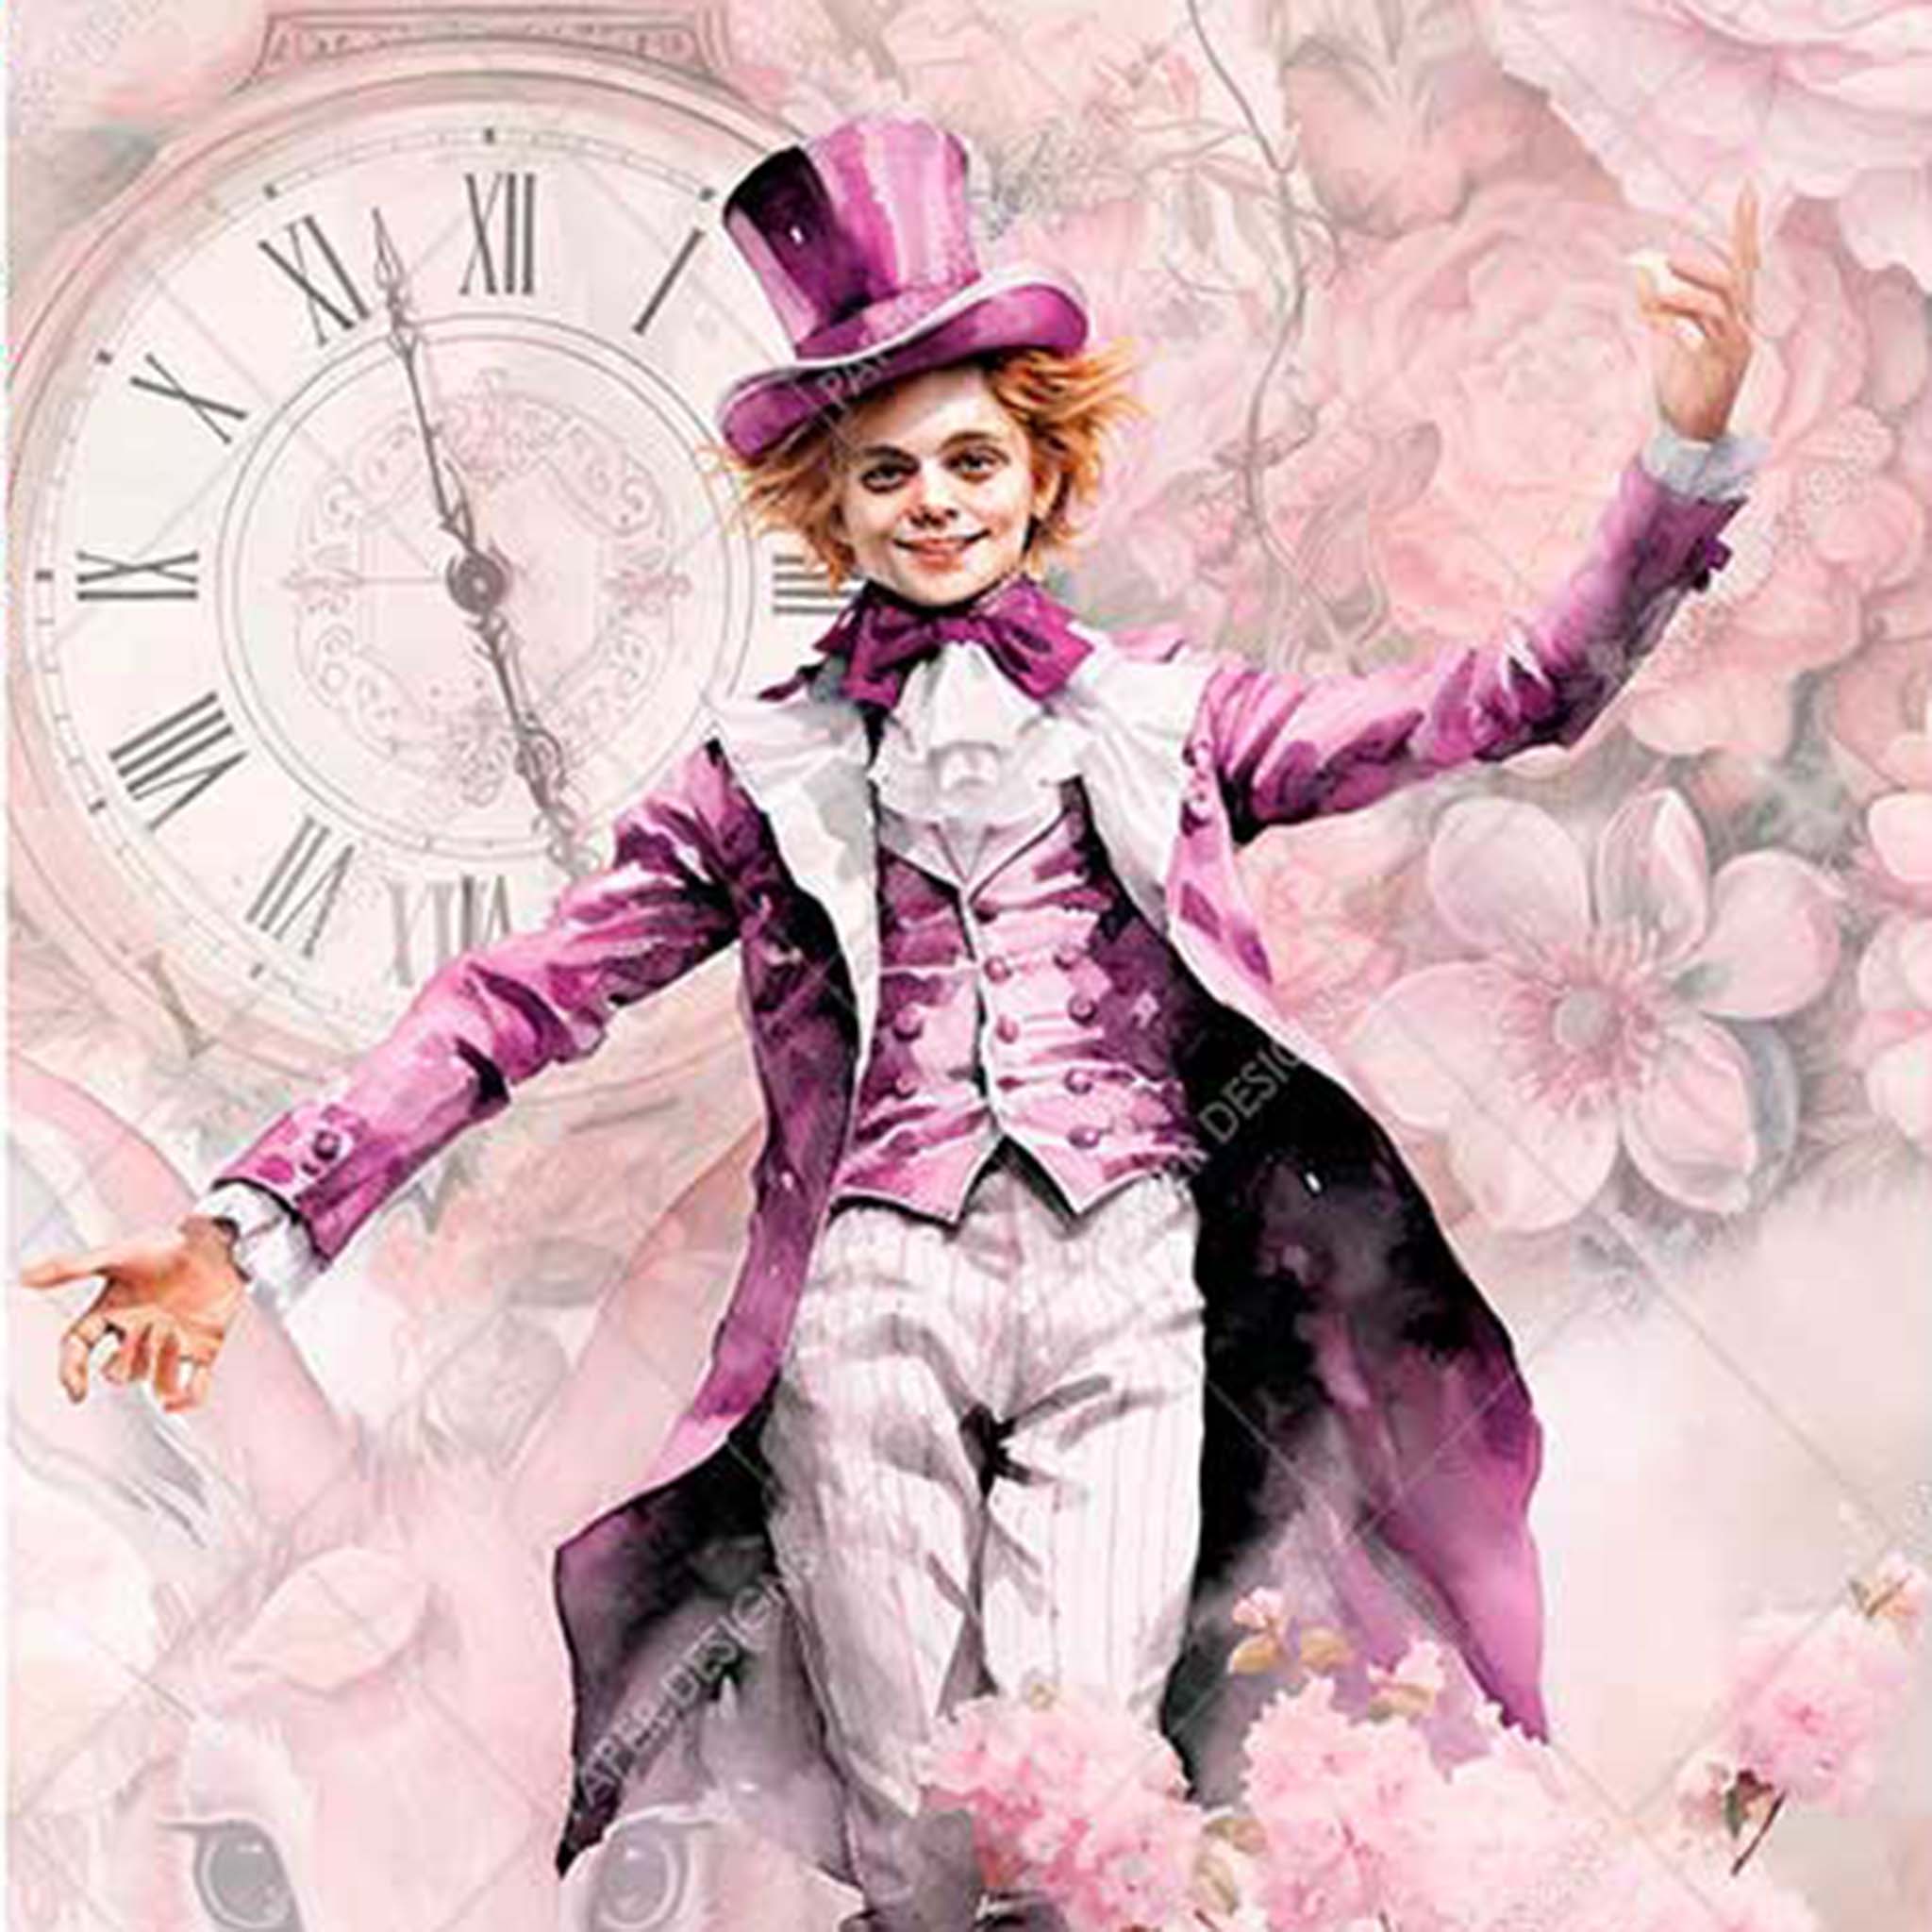 Close-up of an A2 rice paper design featuring The Mad Hatter and a tea set against a large clock face and rabbit face in front of a pink floral background.